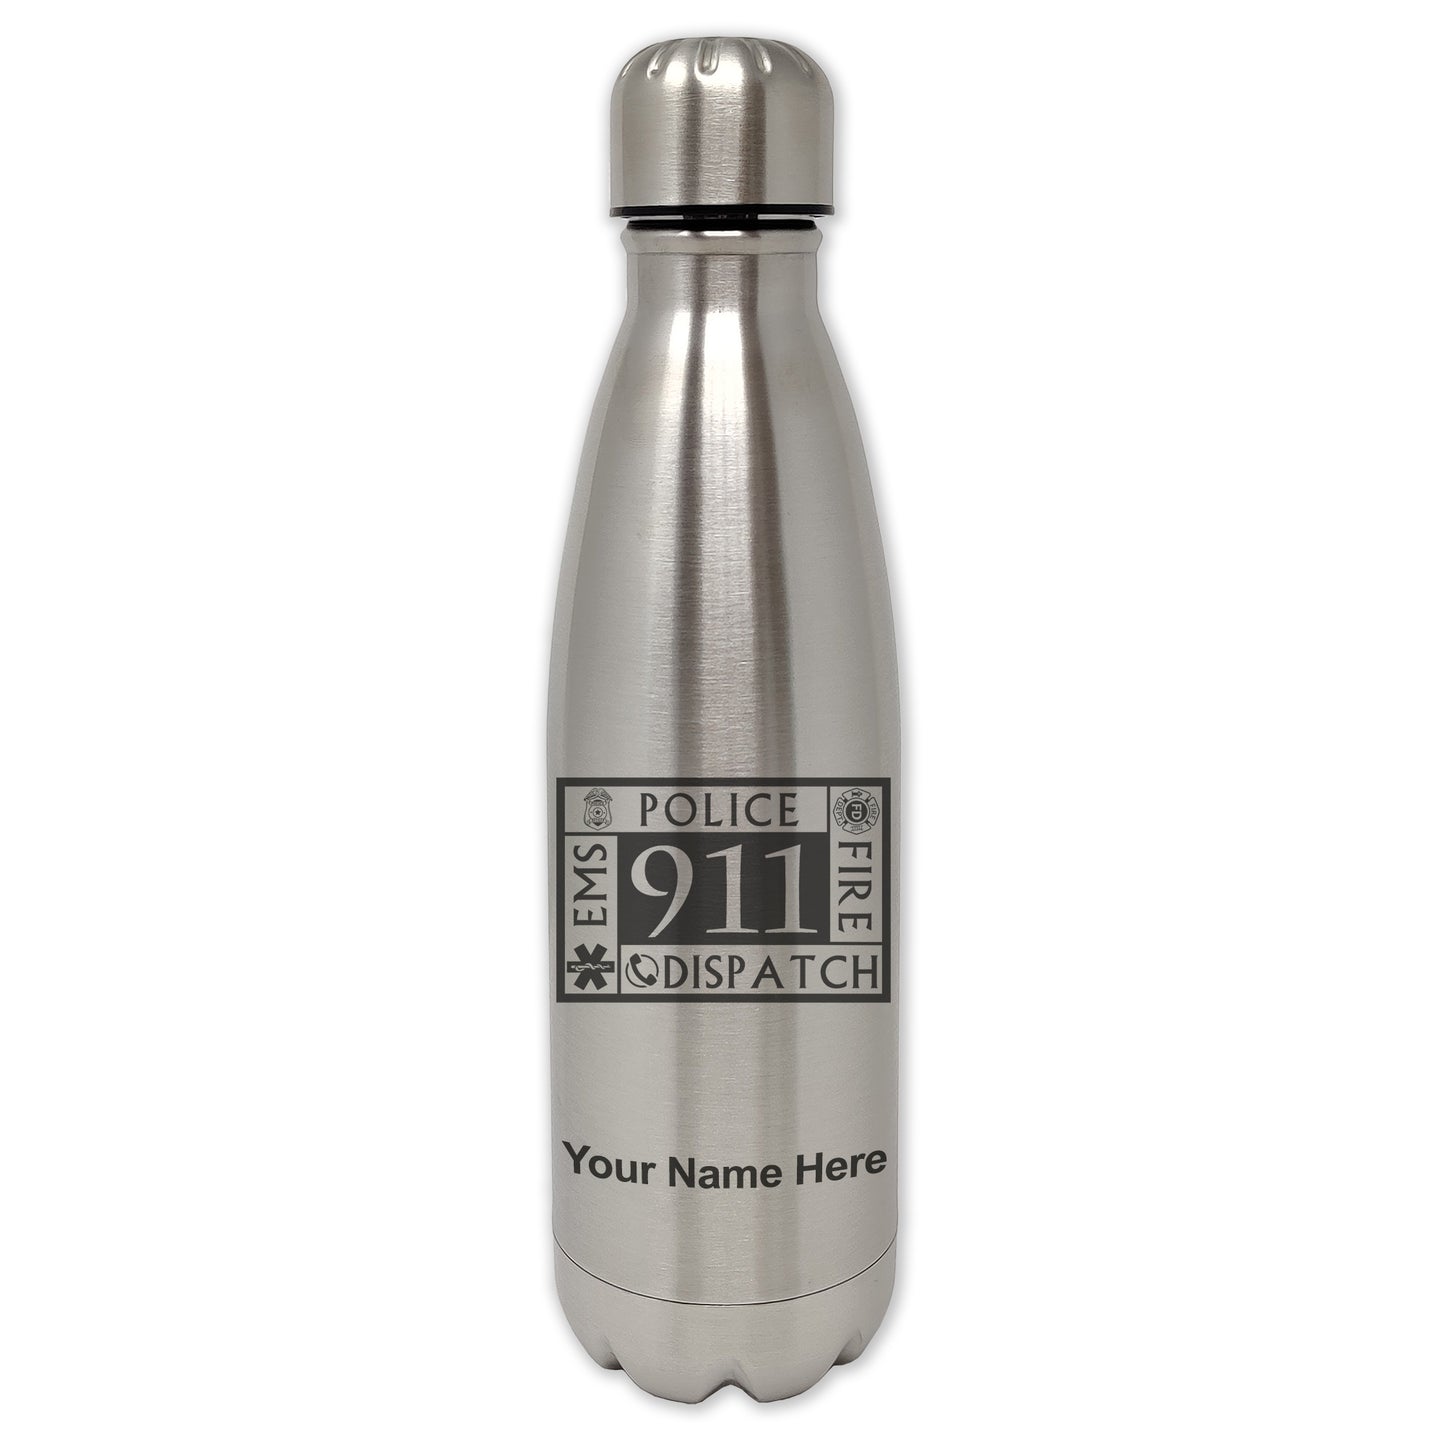 LaserGram Single Wall Water Bottle, Emergency Dispatcher 911, Personalized Engraving Included